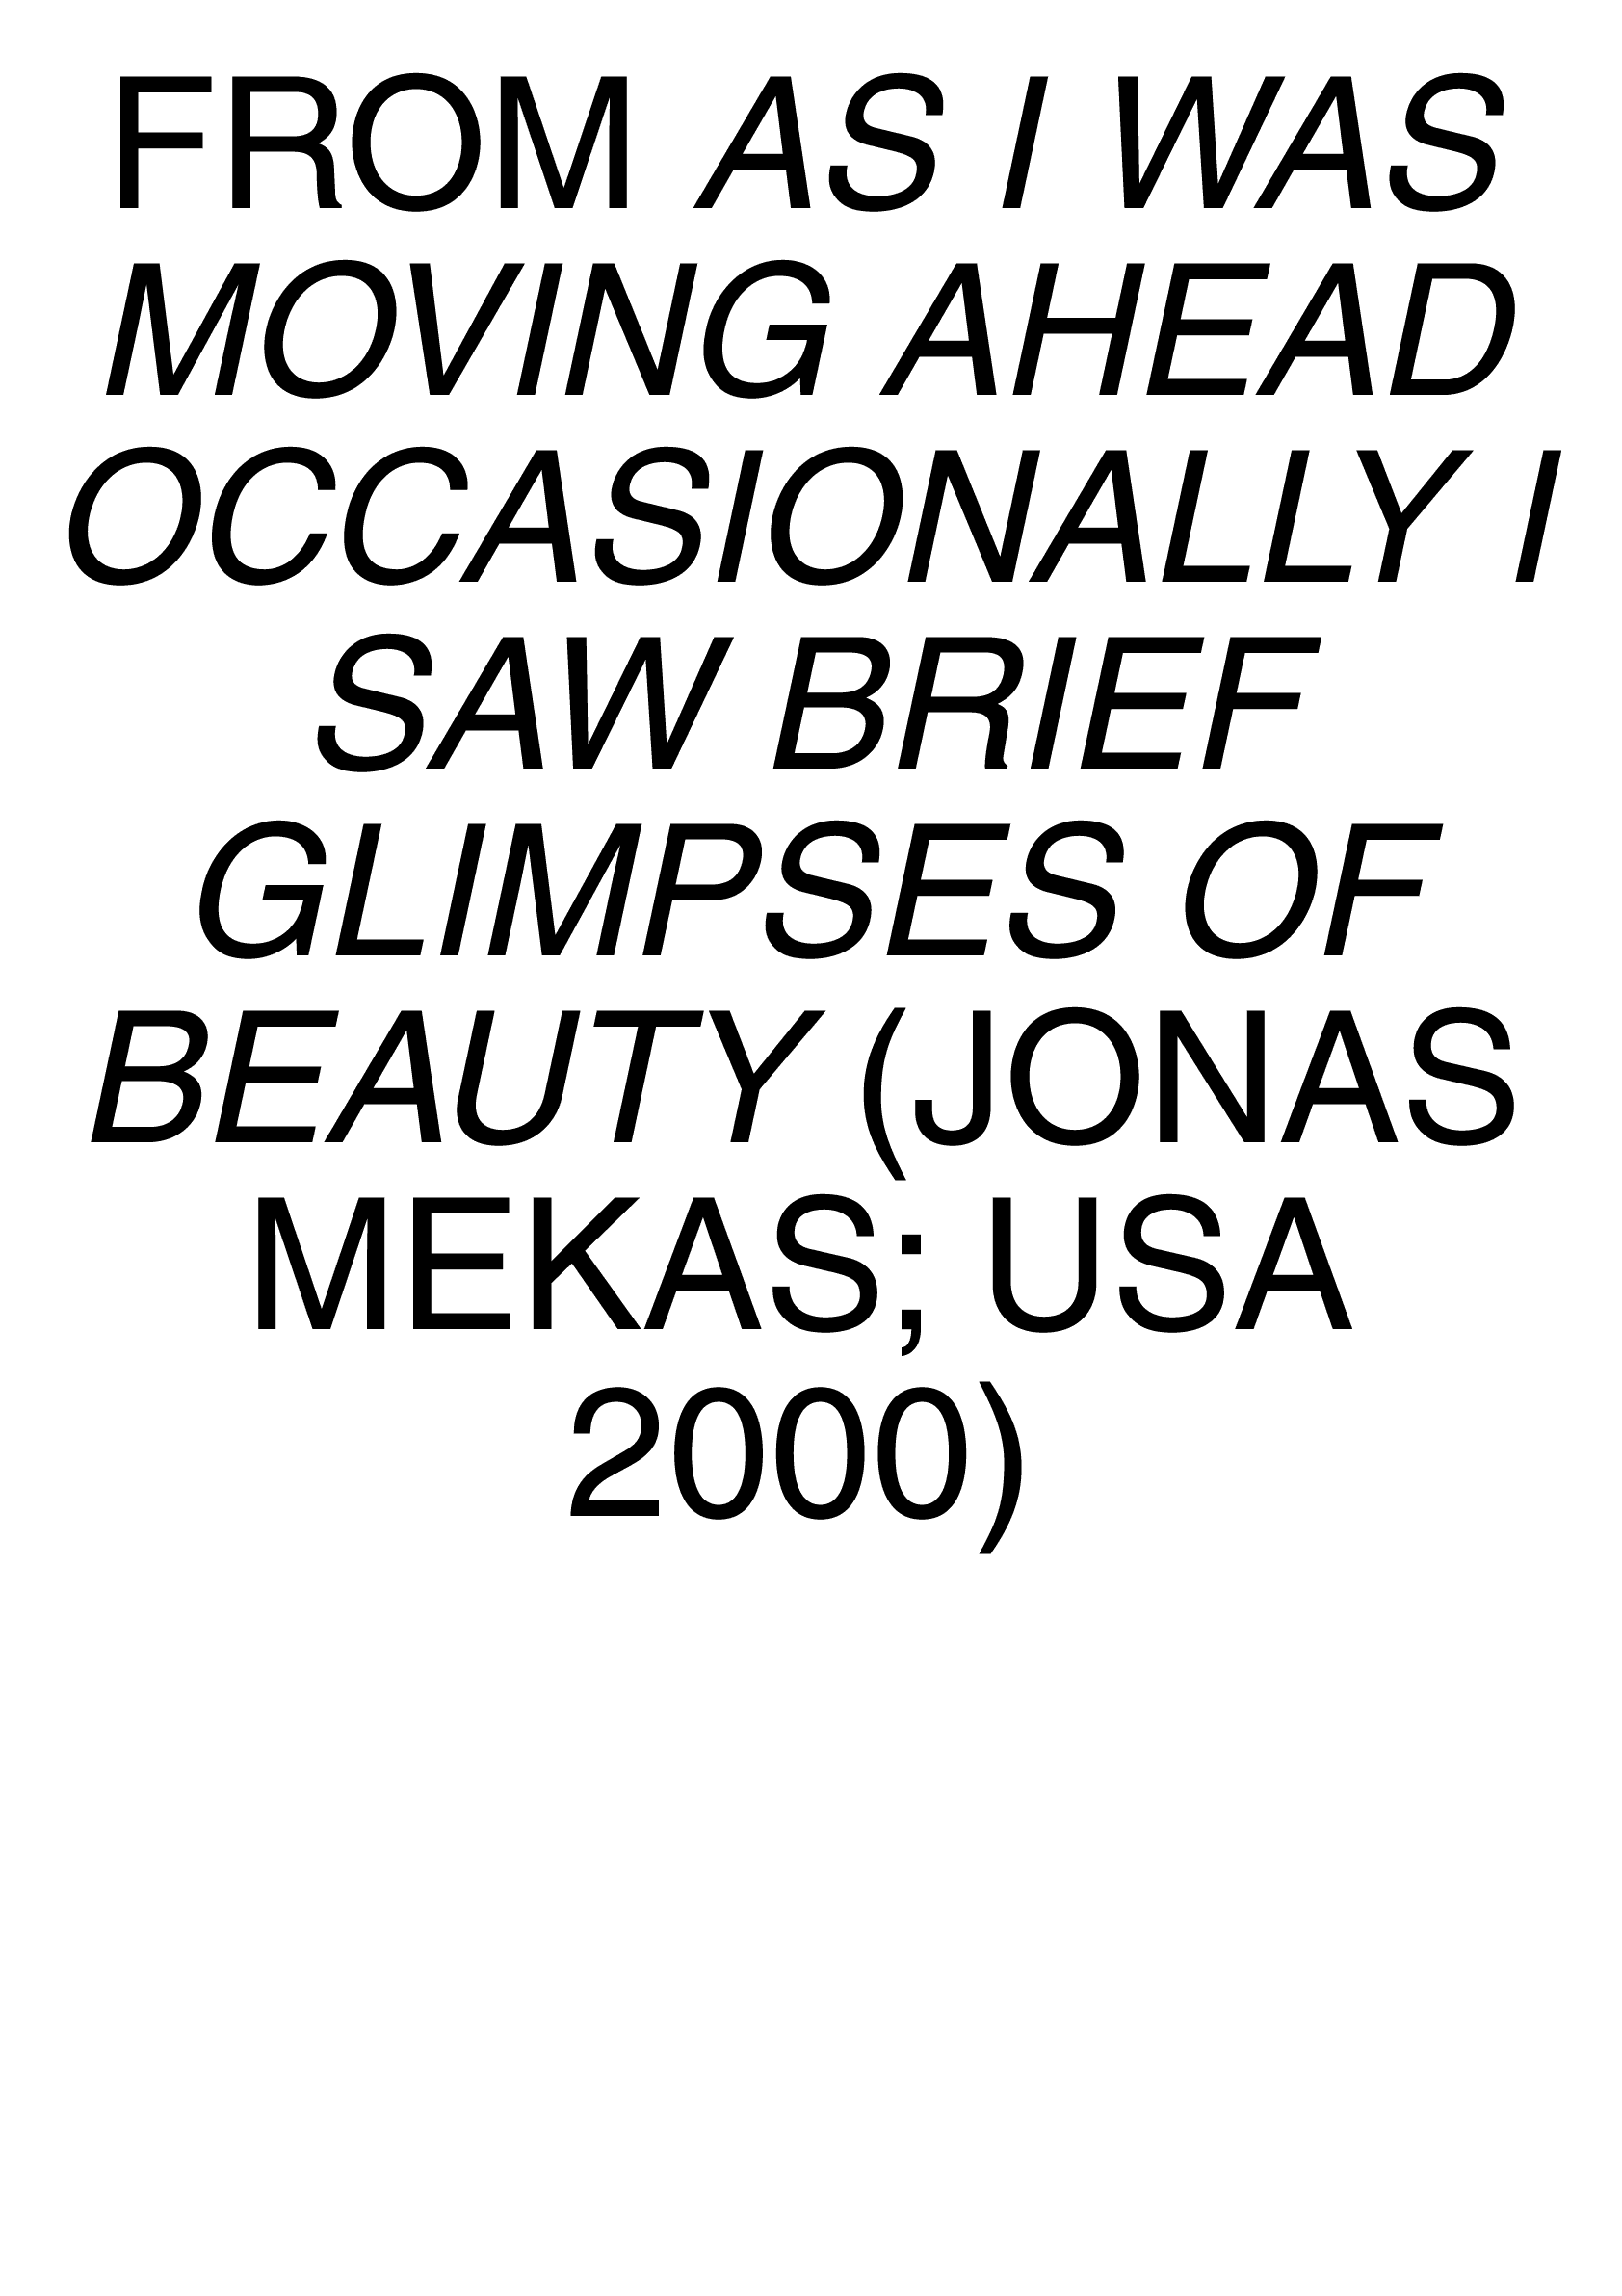 FROM AS I WAS MOVING AHEAD OCCASIONALLY I SAW BRIEF GLIMPSES OF BEAUTY (JONAS MEKAS; USA 2000)